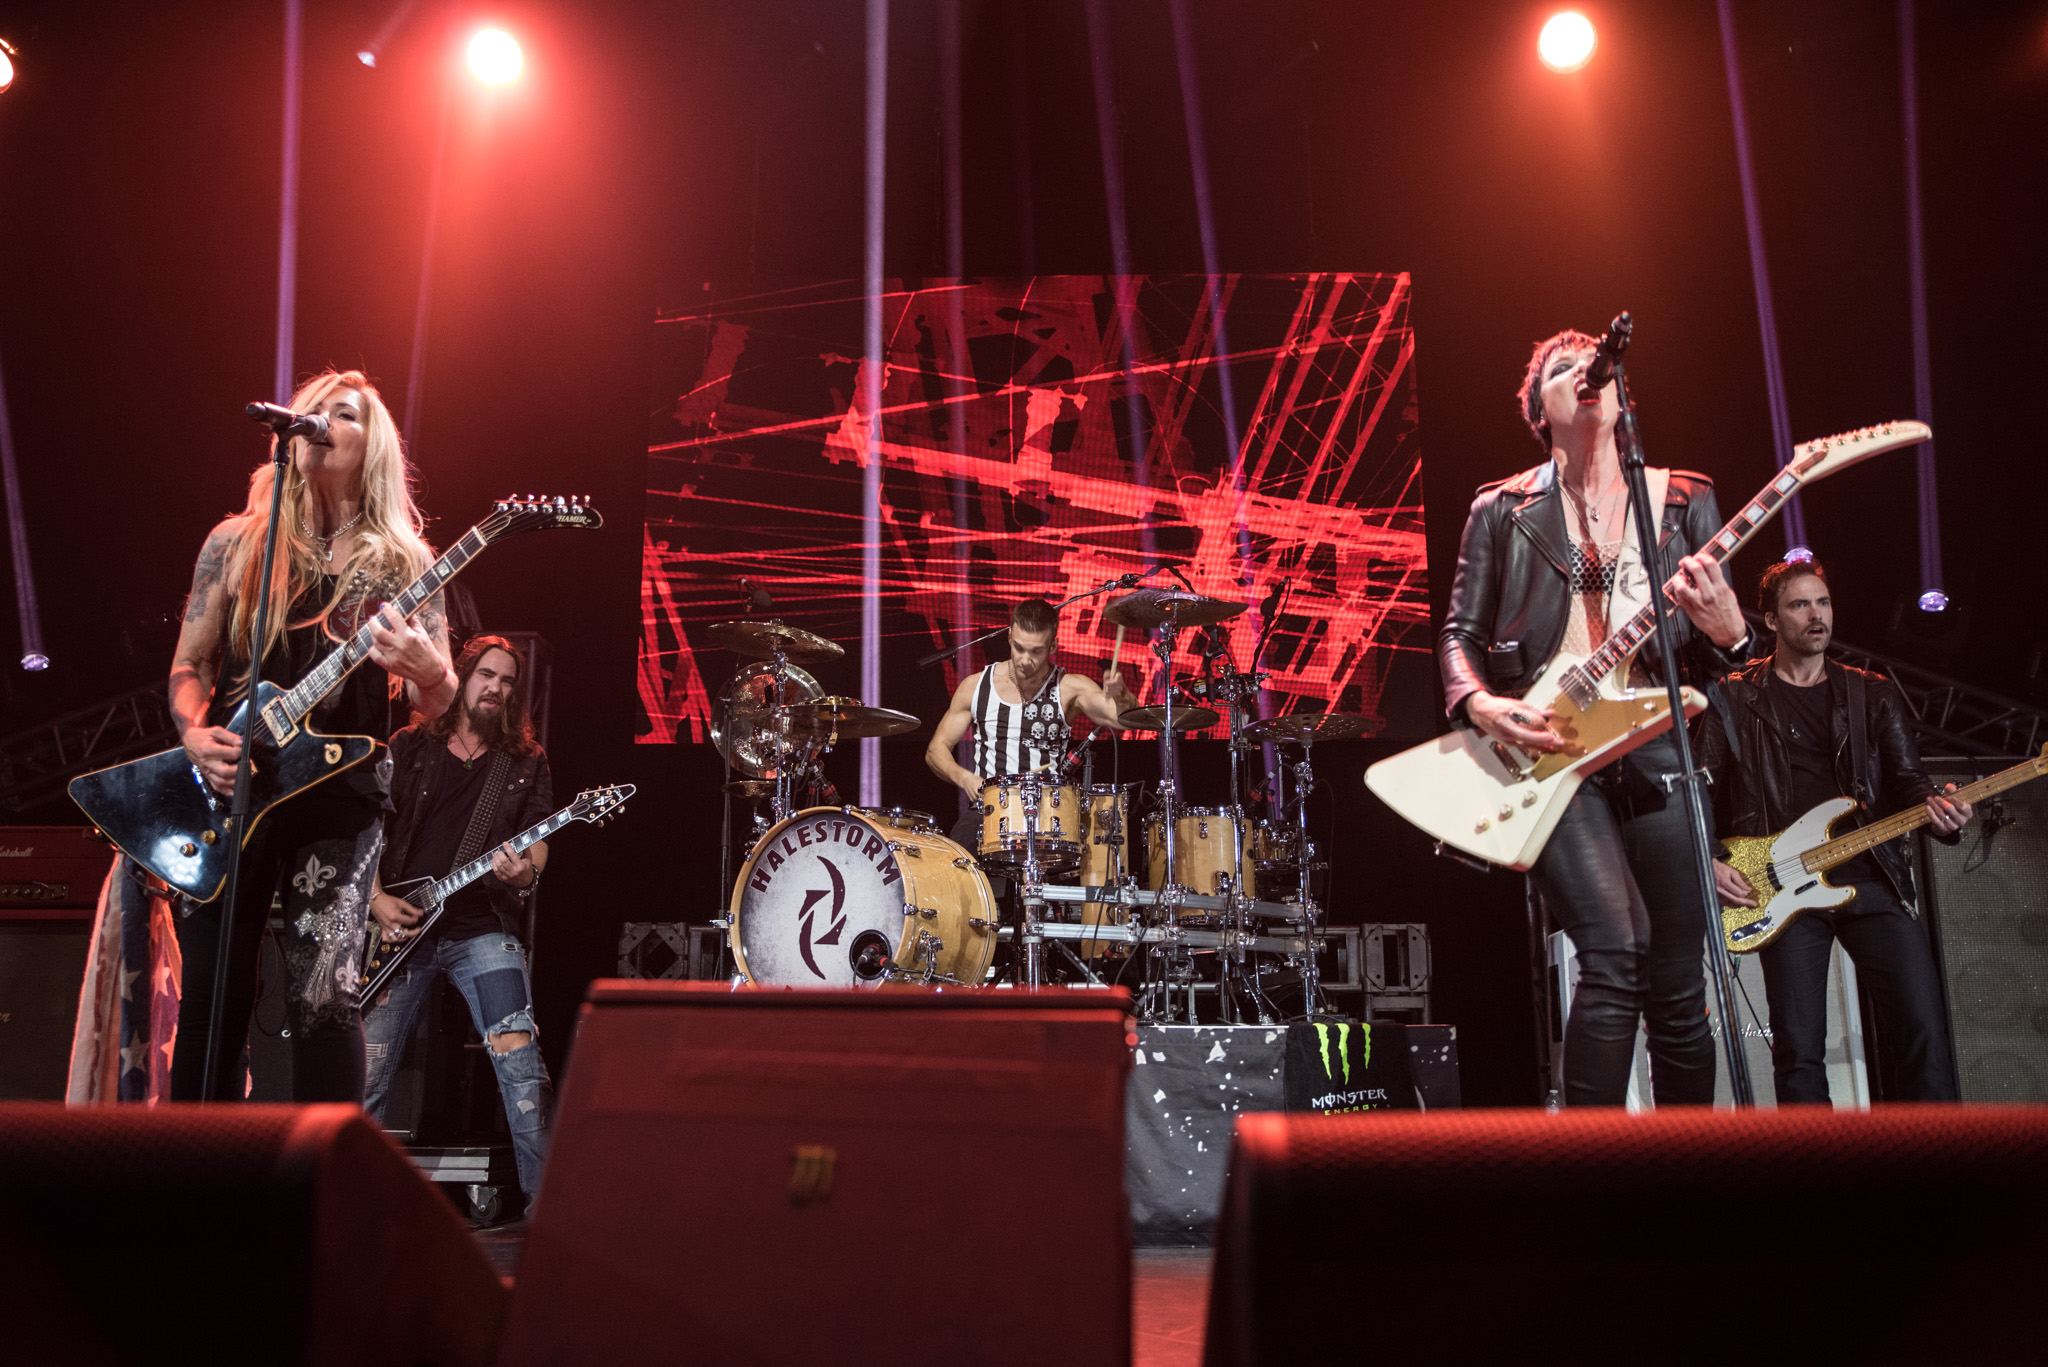 LITA FORD and LZZY HALE perform The Runaways classic -Credit Kevin Wilson, 2017 Loudwire Music Awards.